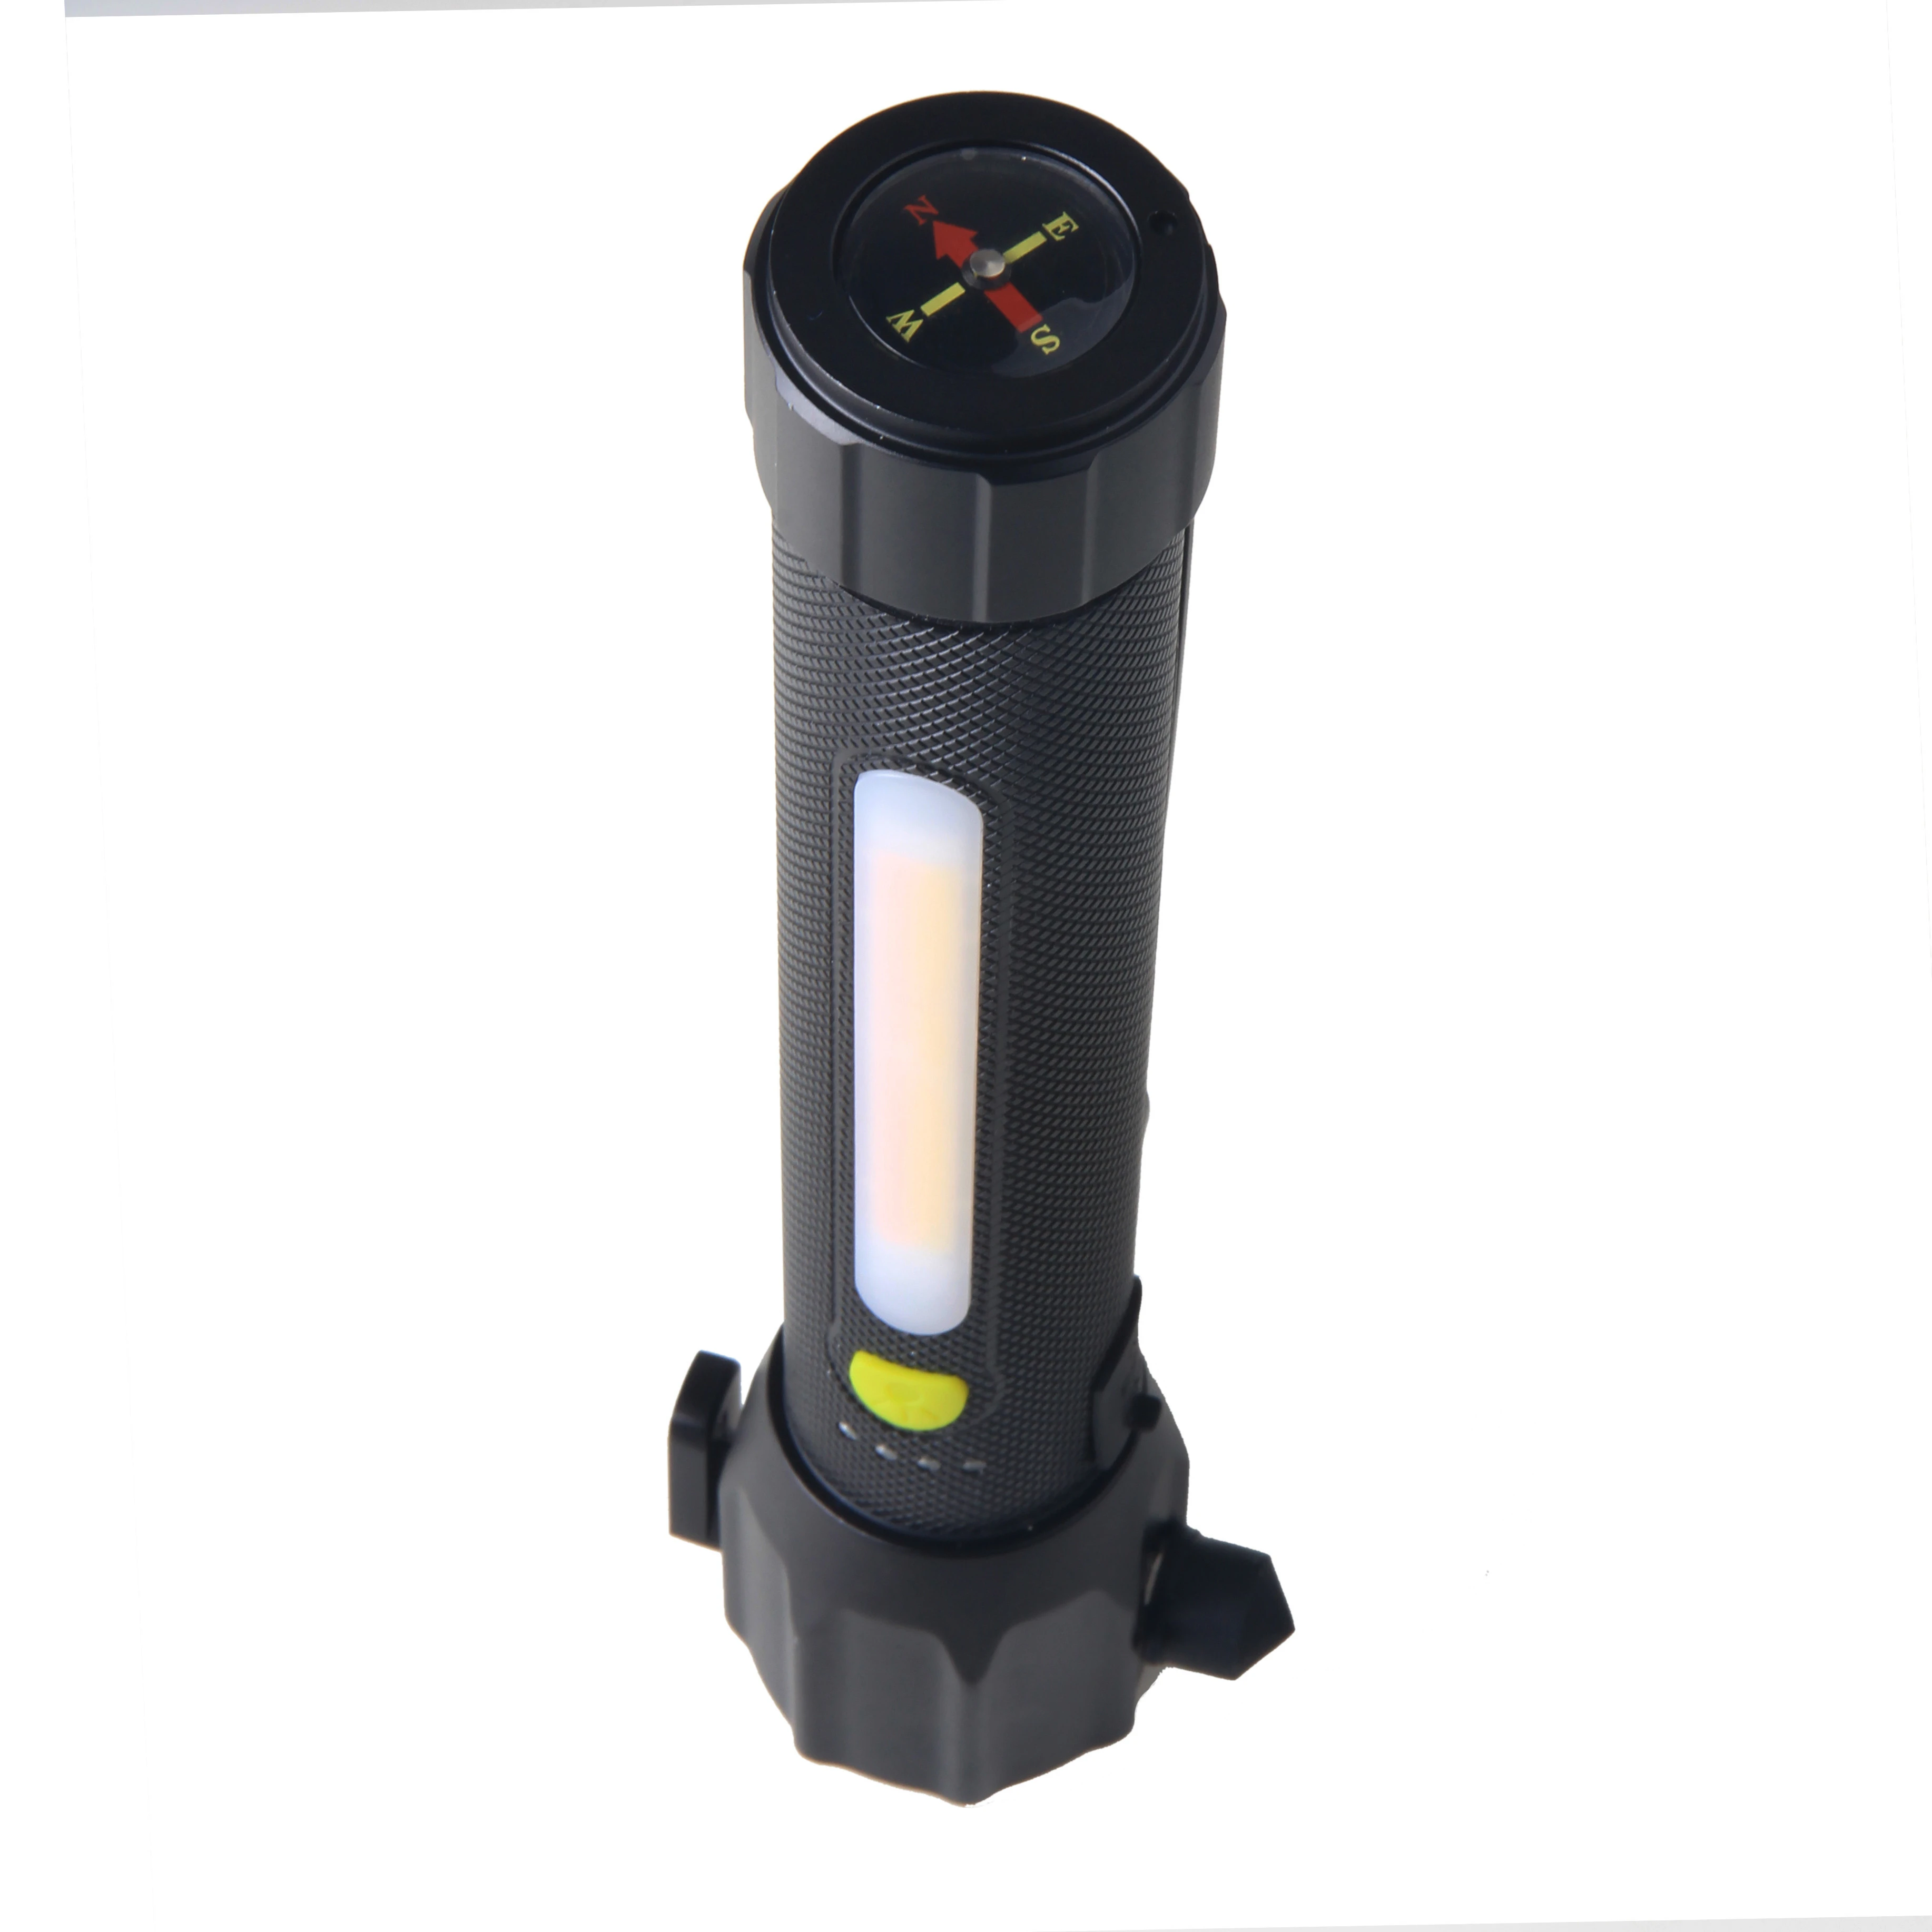 Multi car safety hammer with cellphone character and rechargeable dynamo flashlight